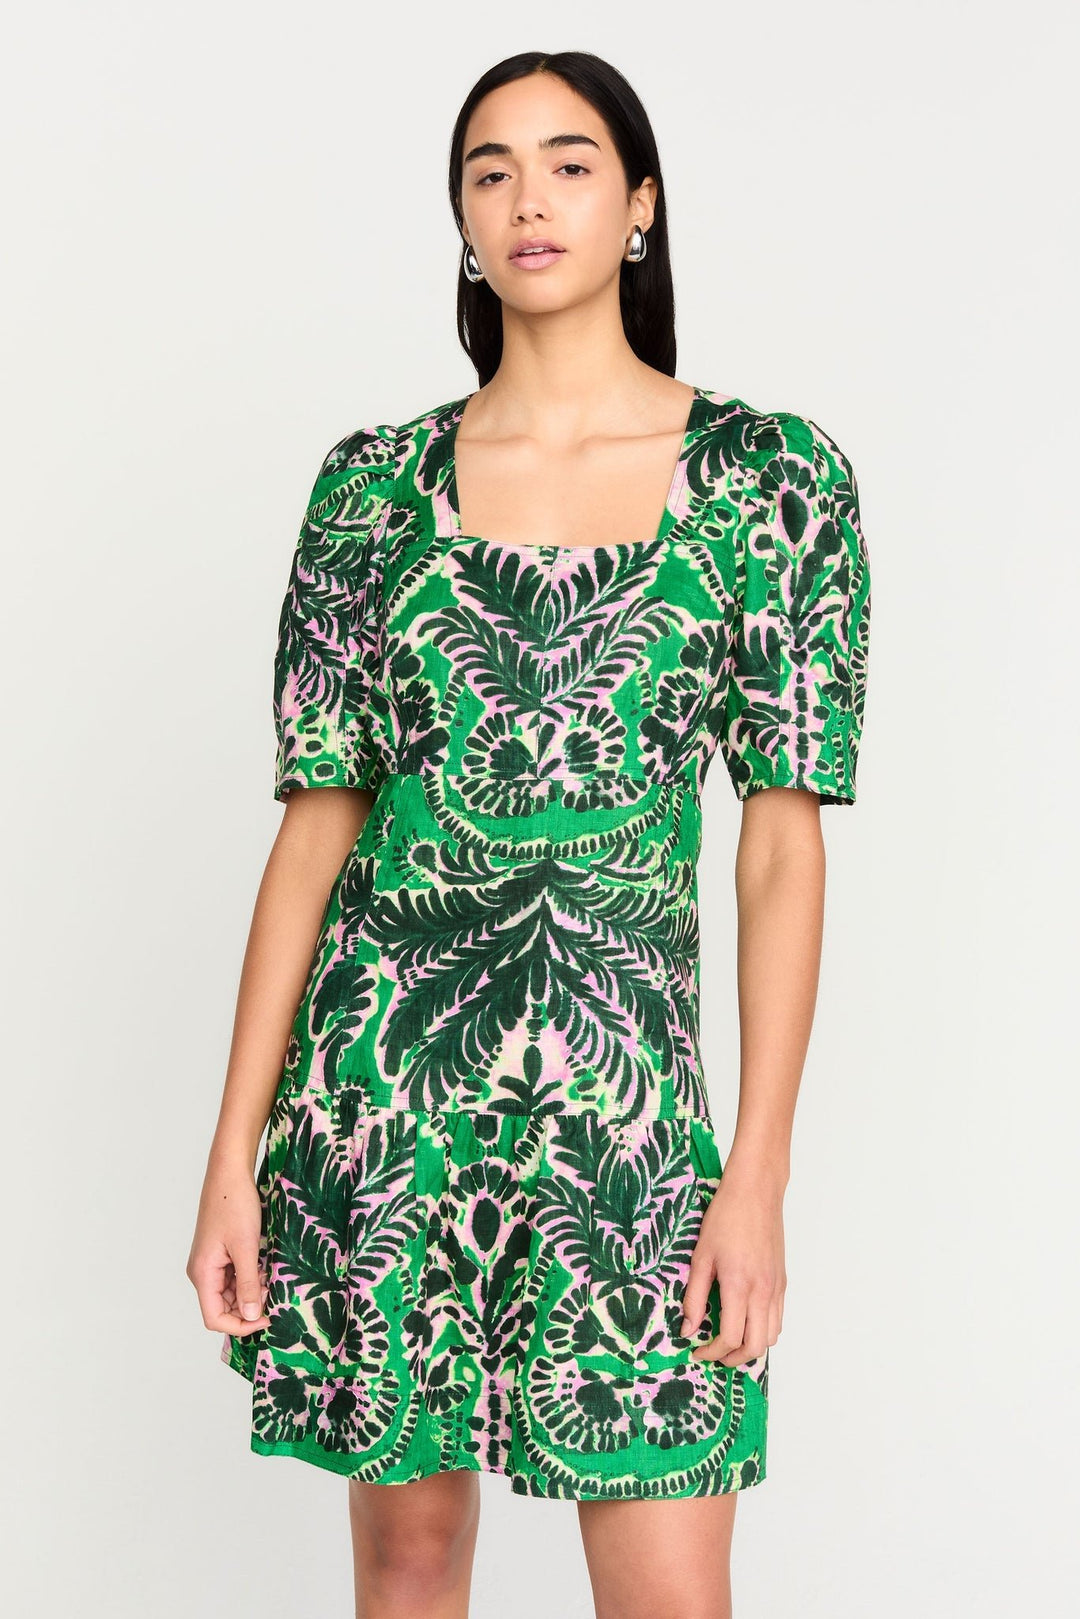 Marie Oliver - Temma Puff Sleeve Dress: Palm Beach - Shorely Chic Boutique